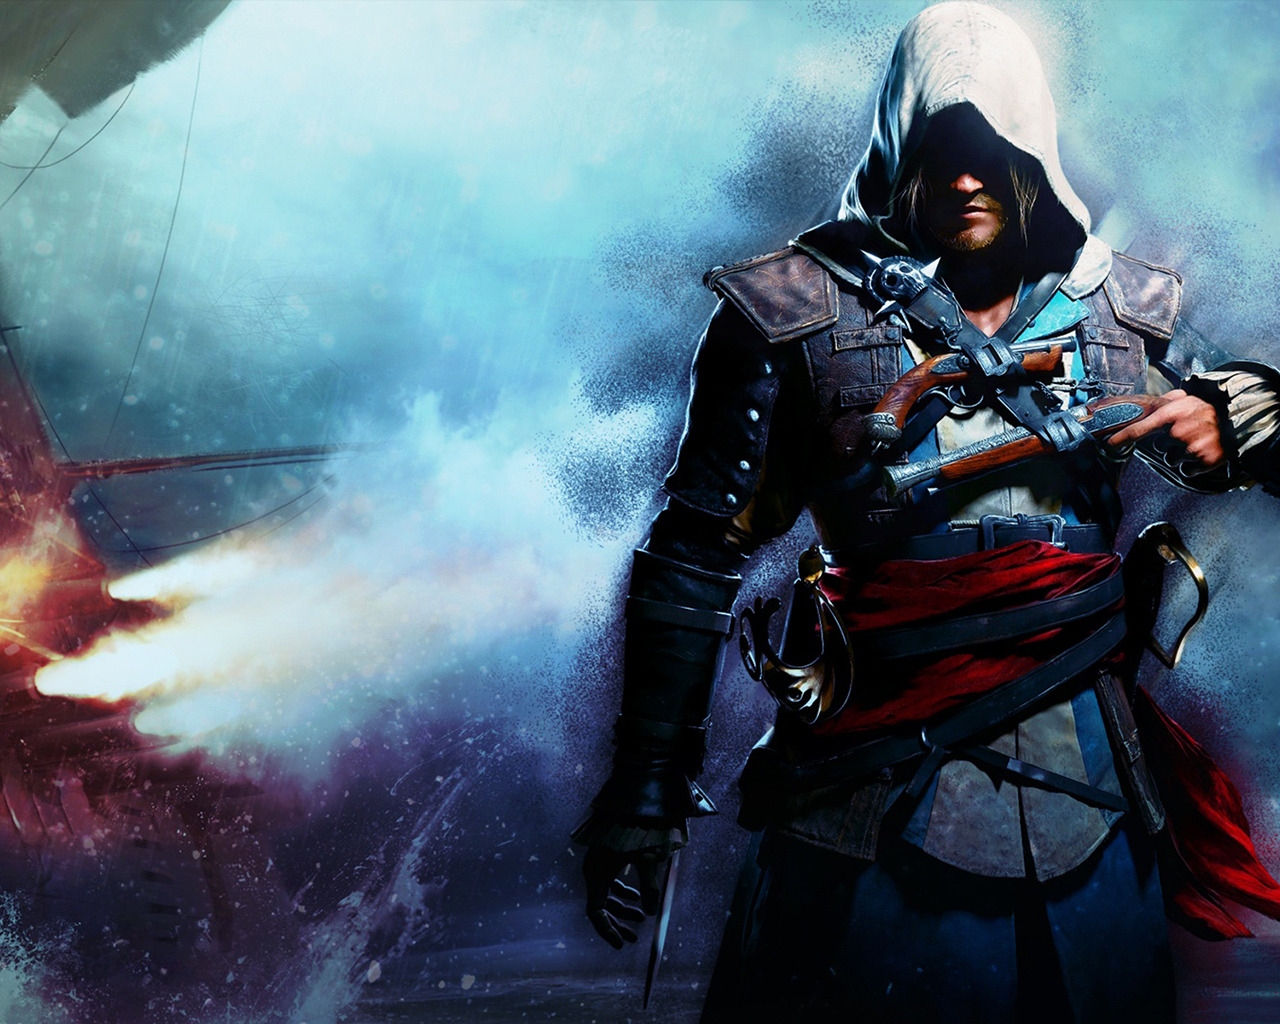 Assassins Creed 4 Black Flag for 1280 x 1024 resolution